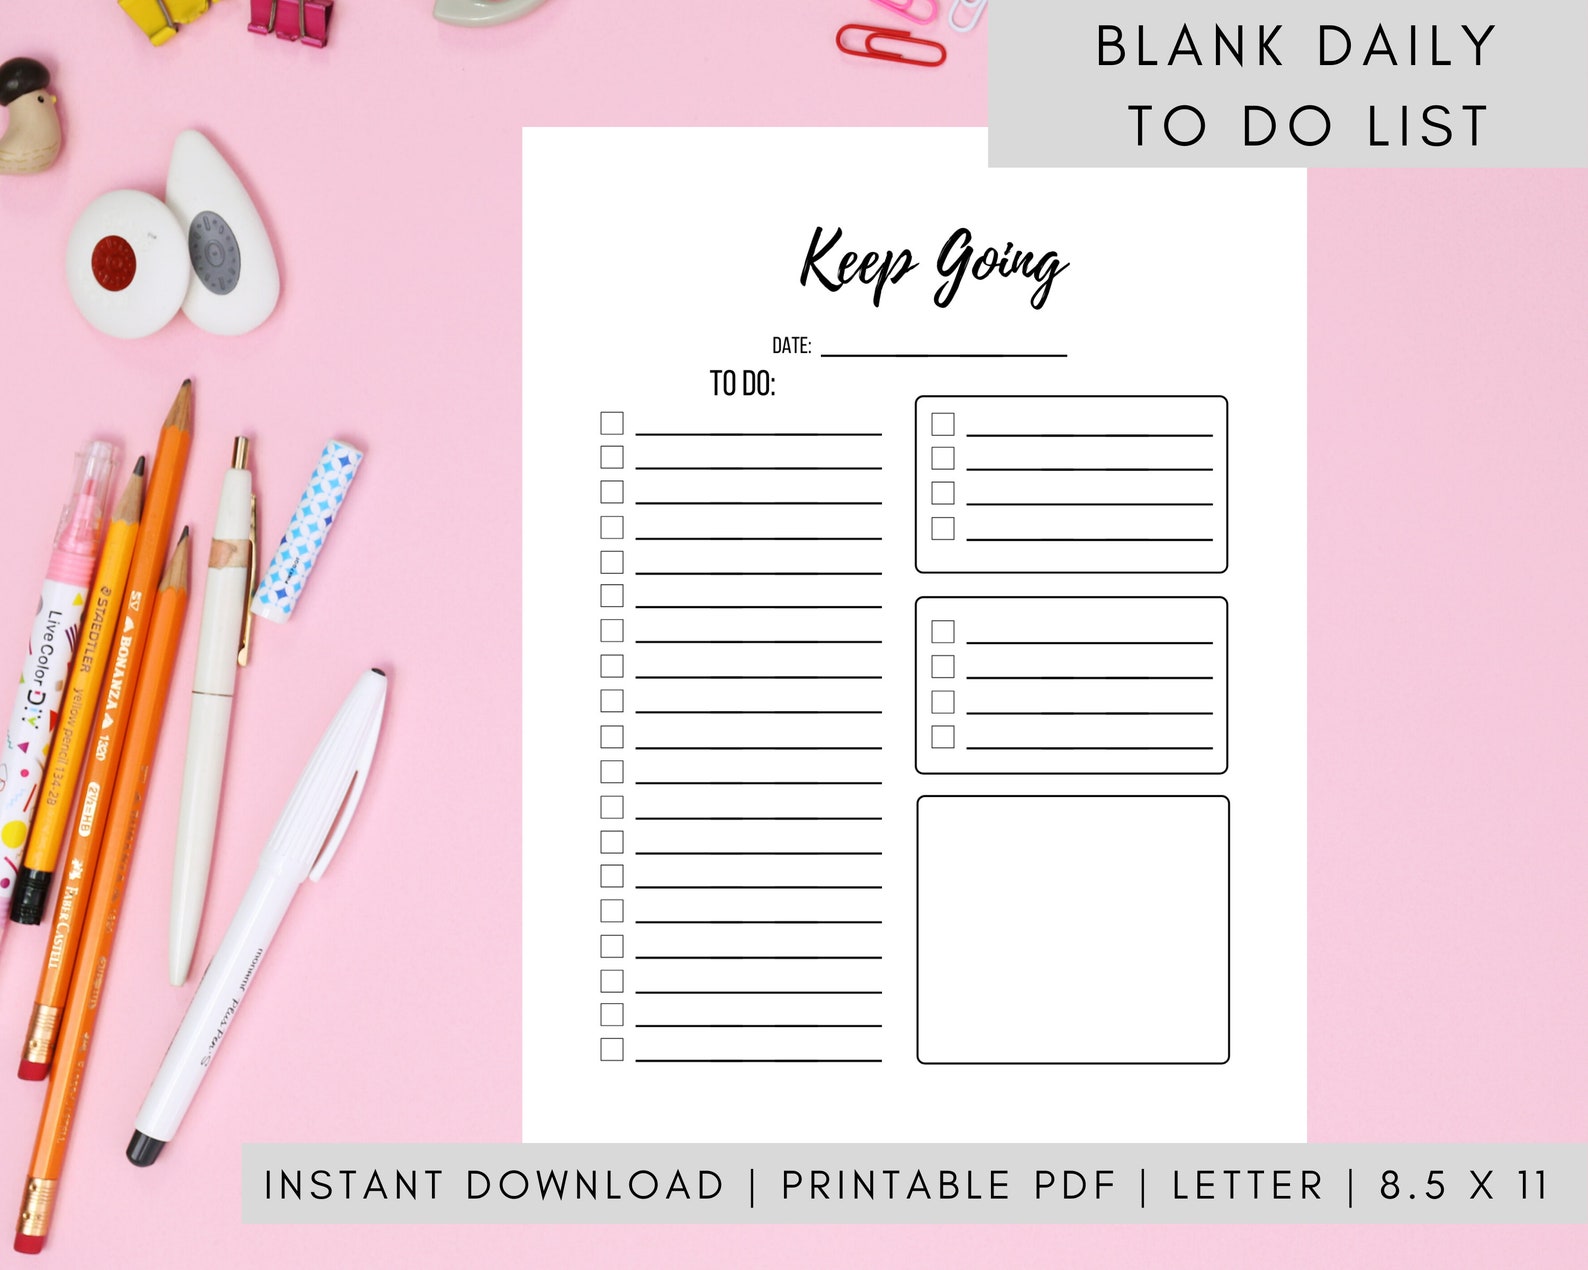 blank-daily-to-do-list-printable-to-do-list-planner-etsy